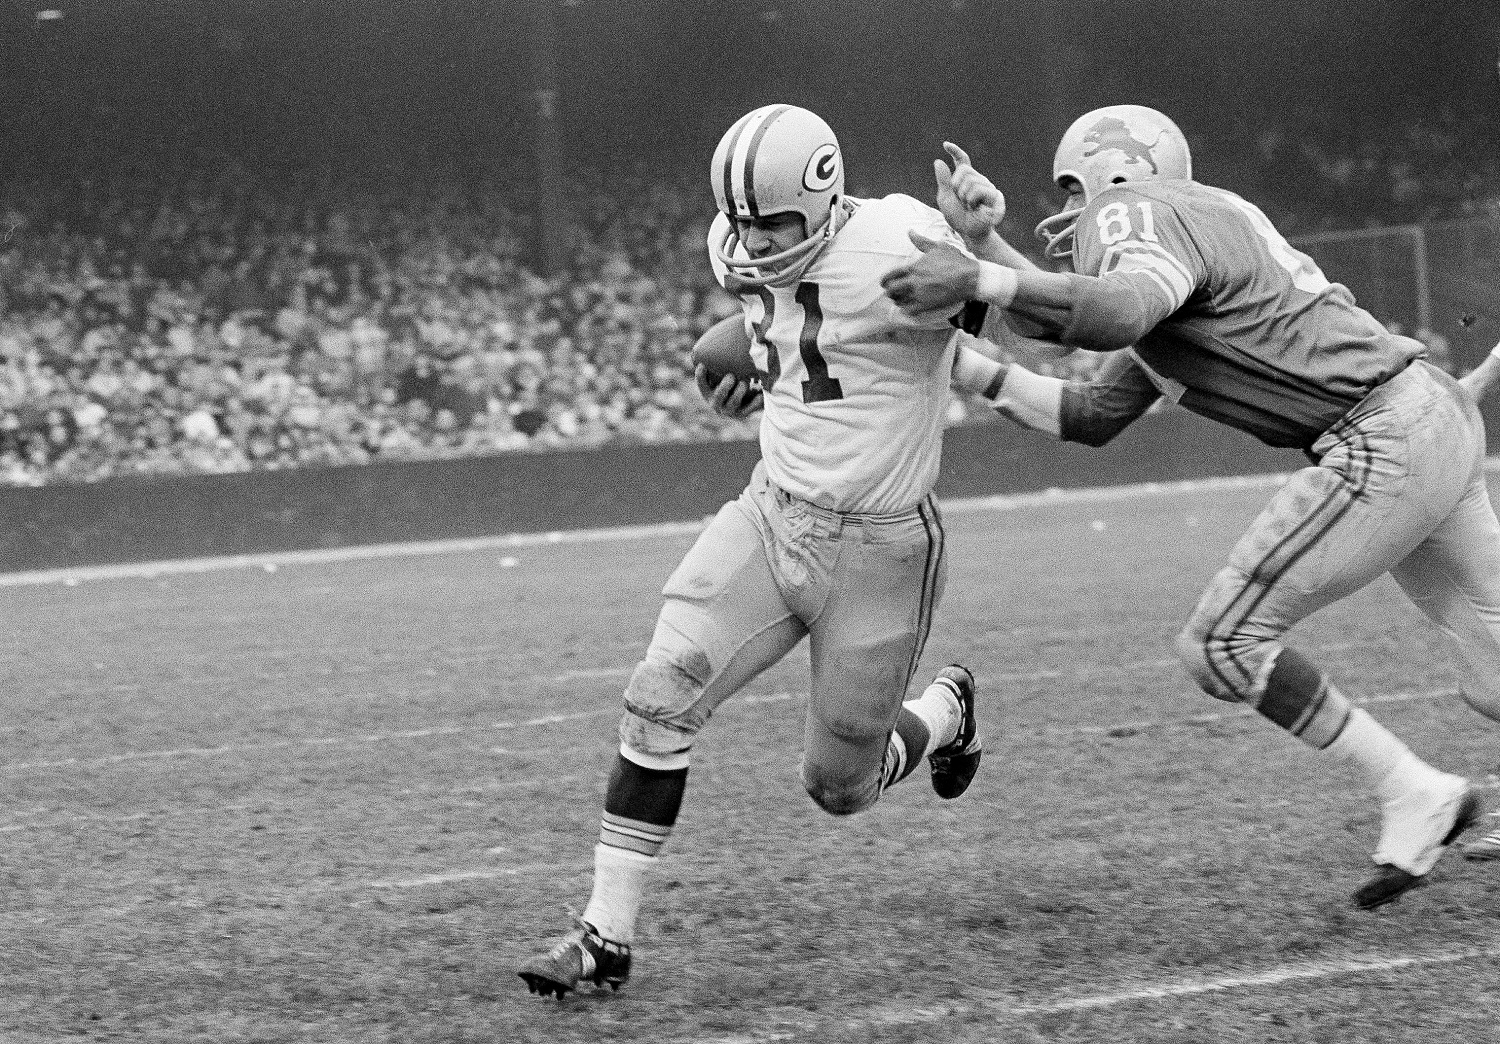 Jim Taylor (31) of the Green Bay Packers, the NFL's leading ground-gainer, is brought down by Lions' Dick Lane in the third quarter in Detroit, Nov. 22, 1962. Taylor was held to a scant 47 yards on the ground by Detroit in dumping the league's leaders 26-14. (AP Photo/Preston Stroup)